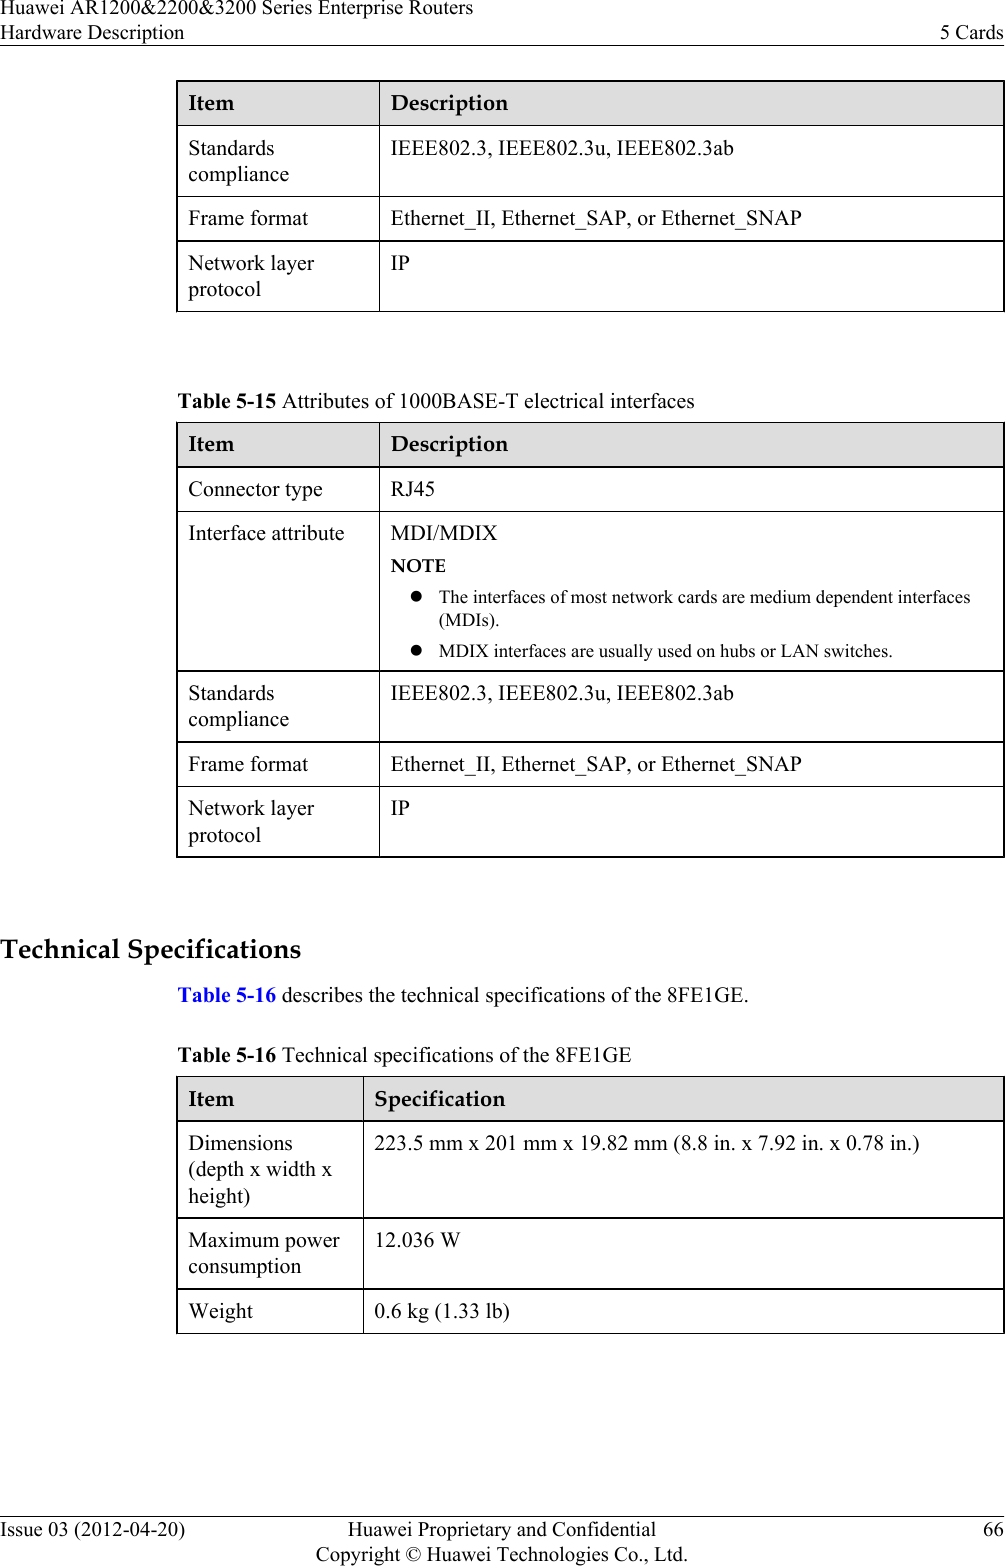 Item DescriptionStandardscomplianceIEEE802.3, IEEE802.3u, IEEE802.3abFrame format Ethernet_II, Ethernet_SAP, or Ethernet_SNAPNetwork layerprotocolIP Table 5-15 Attributes of 1000BASE-T electrical interfacesItem DescriptionConnector type RJ45Interface attribute MDI/MDIXNOTElThe interfaces of most network cards are medium dependent interfaces(MDIs).lMDIX interfaces are usually used on hubs or LAN switches.StandardscomplianceIEEE802.3, IEEE802.3u, IEEE802.3abFrame format Ethernet_II, Ethernet_SAP, or Ethernet_SNAPNetwork layerprotocolIP Technical SpecificationsTable 5-16 describes the technical specifications of the 8FE1GE.Table 5-16 Technical specifications of the 8FE1GEItem SpecificationDimensions(depth x width xheight)223.5 mm x 201 mm x 19.82 mm (8.8 in. x 7.92 in. x 0.78 in.)Maximum powerconsumption12.036 WWeight 0.6 kg (1.33 lb) Huawei AR1200&amp;2200&amp;3200 Series Enterprise RoutersHardware Description 5 CardsIssue 03 (2012-04-20) Huawei Proprietary and ConfidentialCopyright © Huawei Technologies Co., Ltd.66